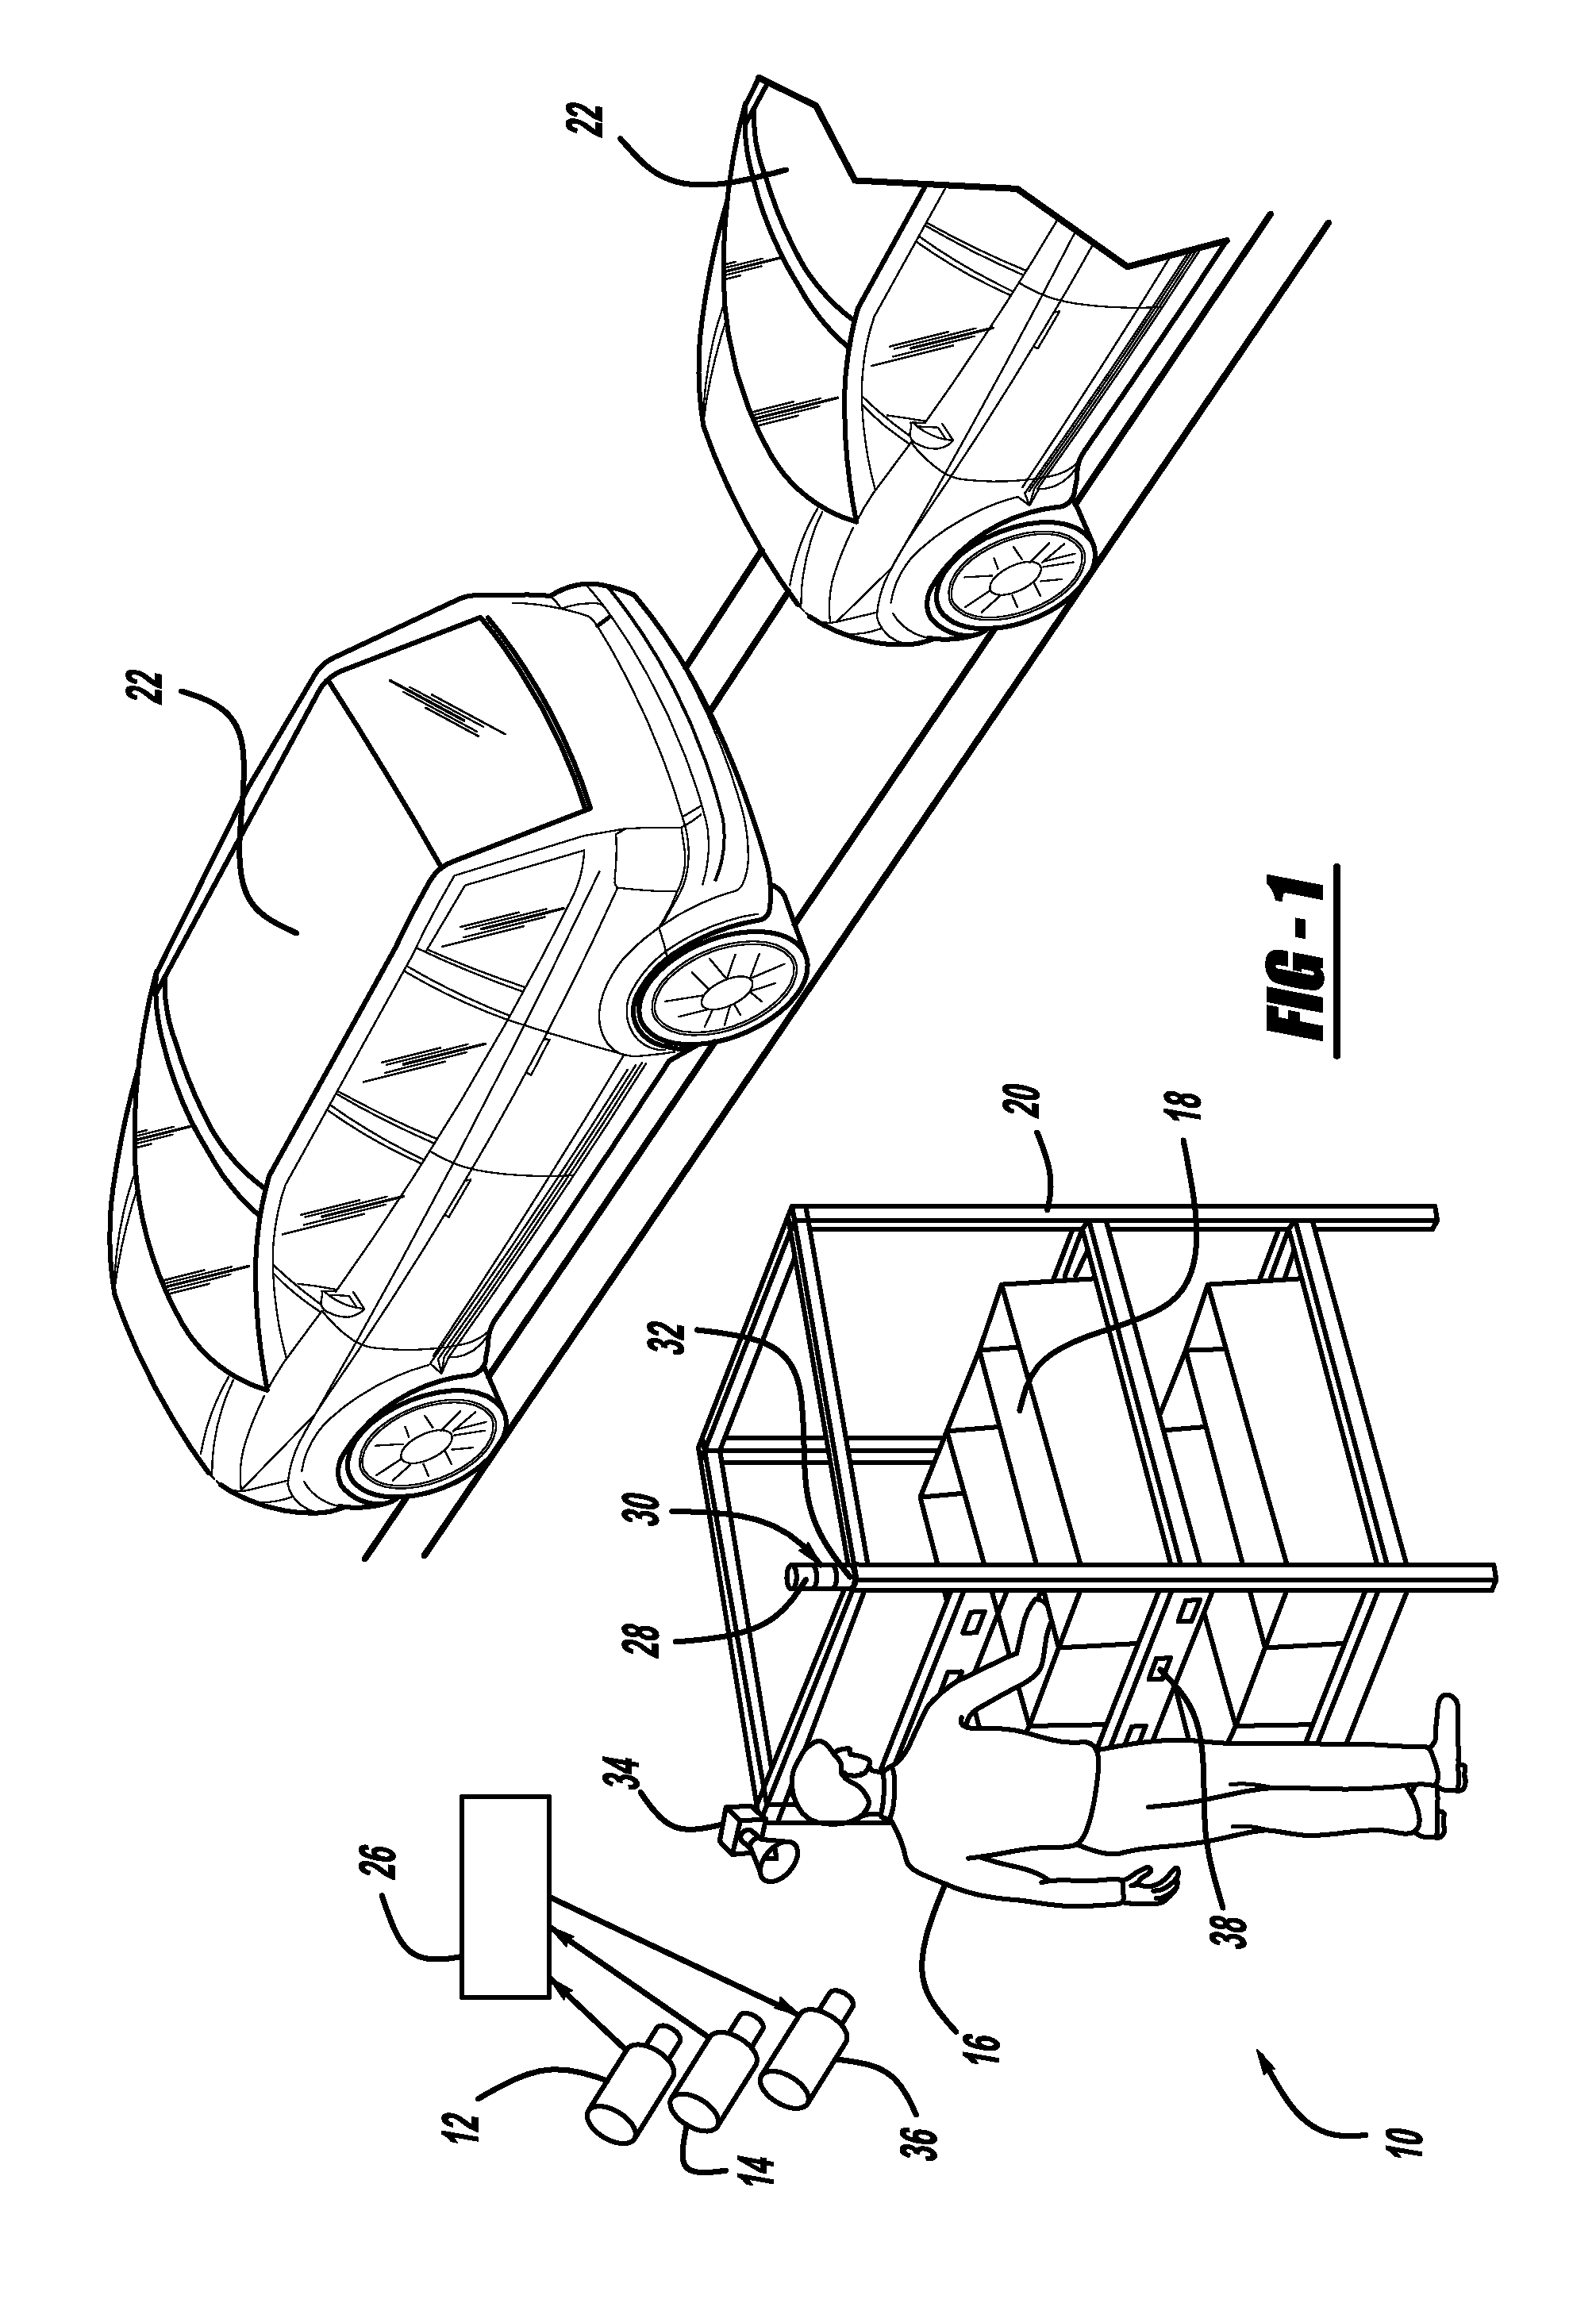 System for error-proofing manual assembly operations using machine vision